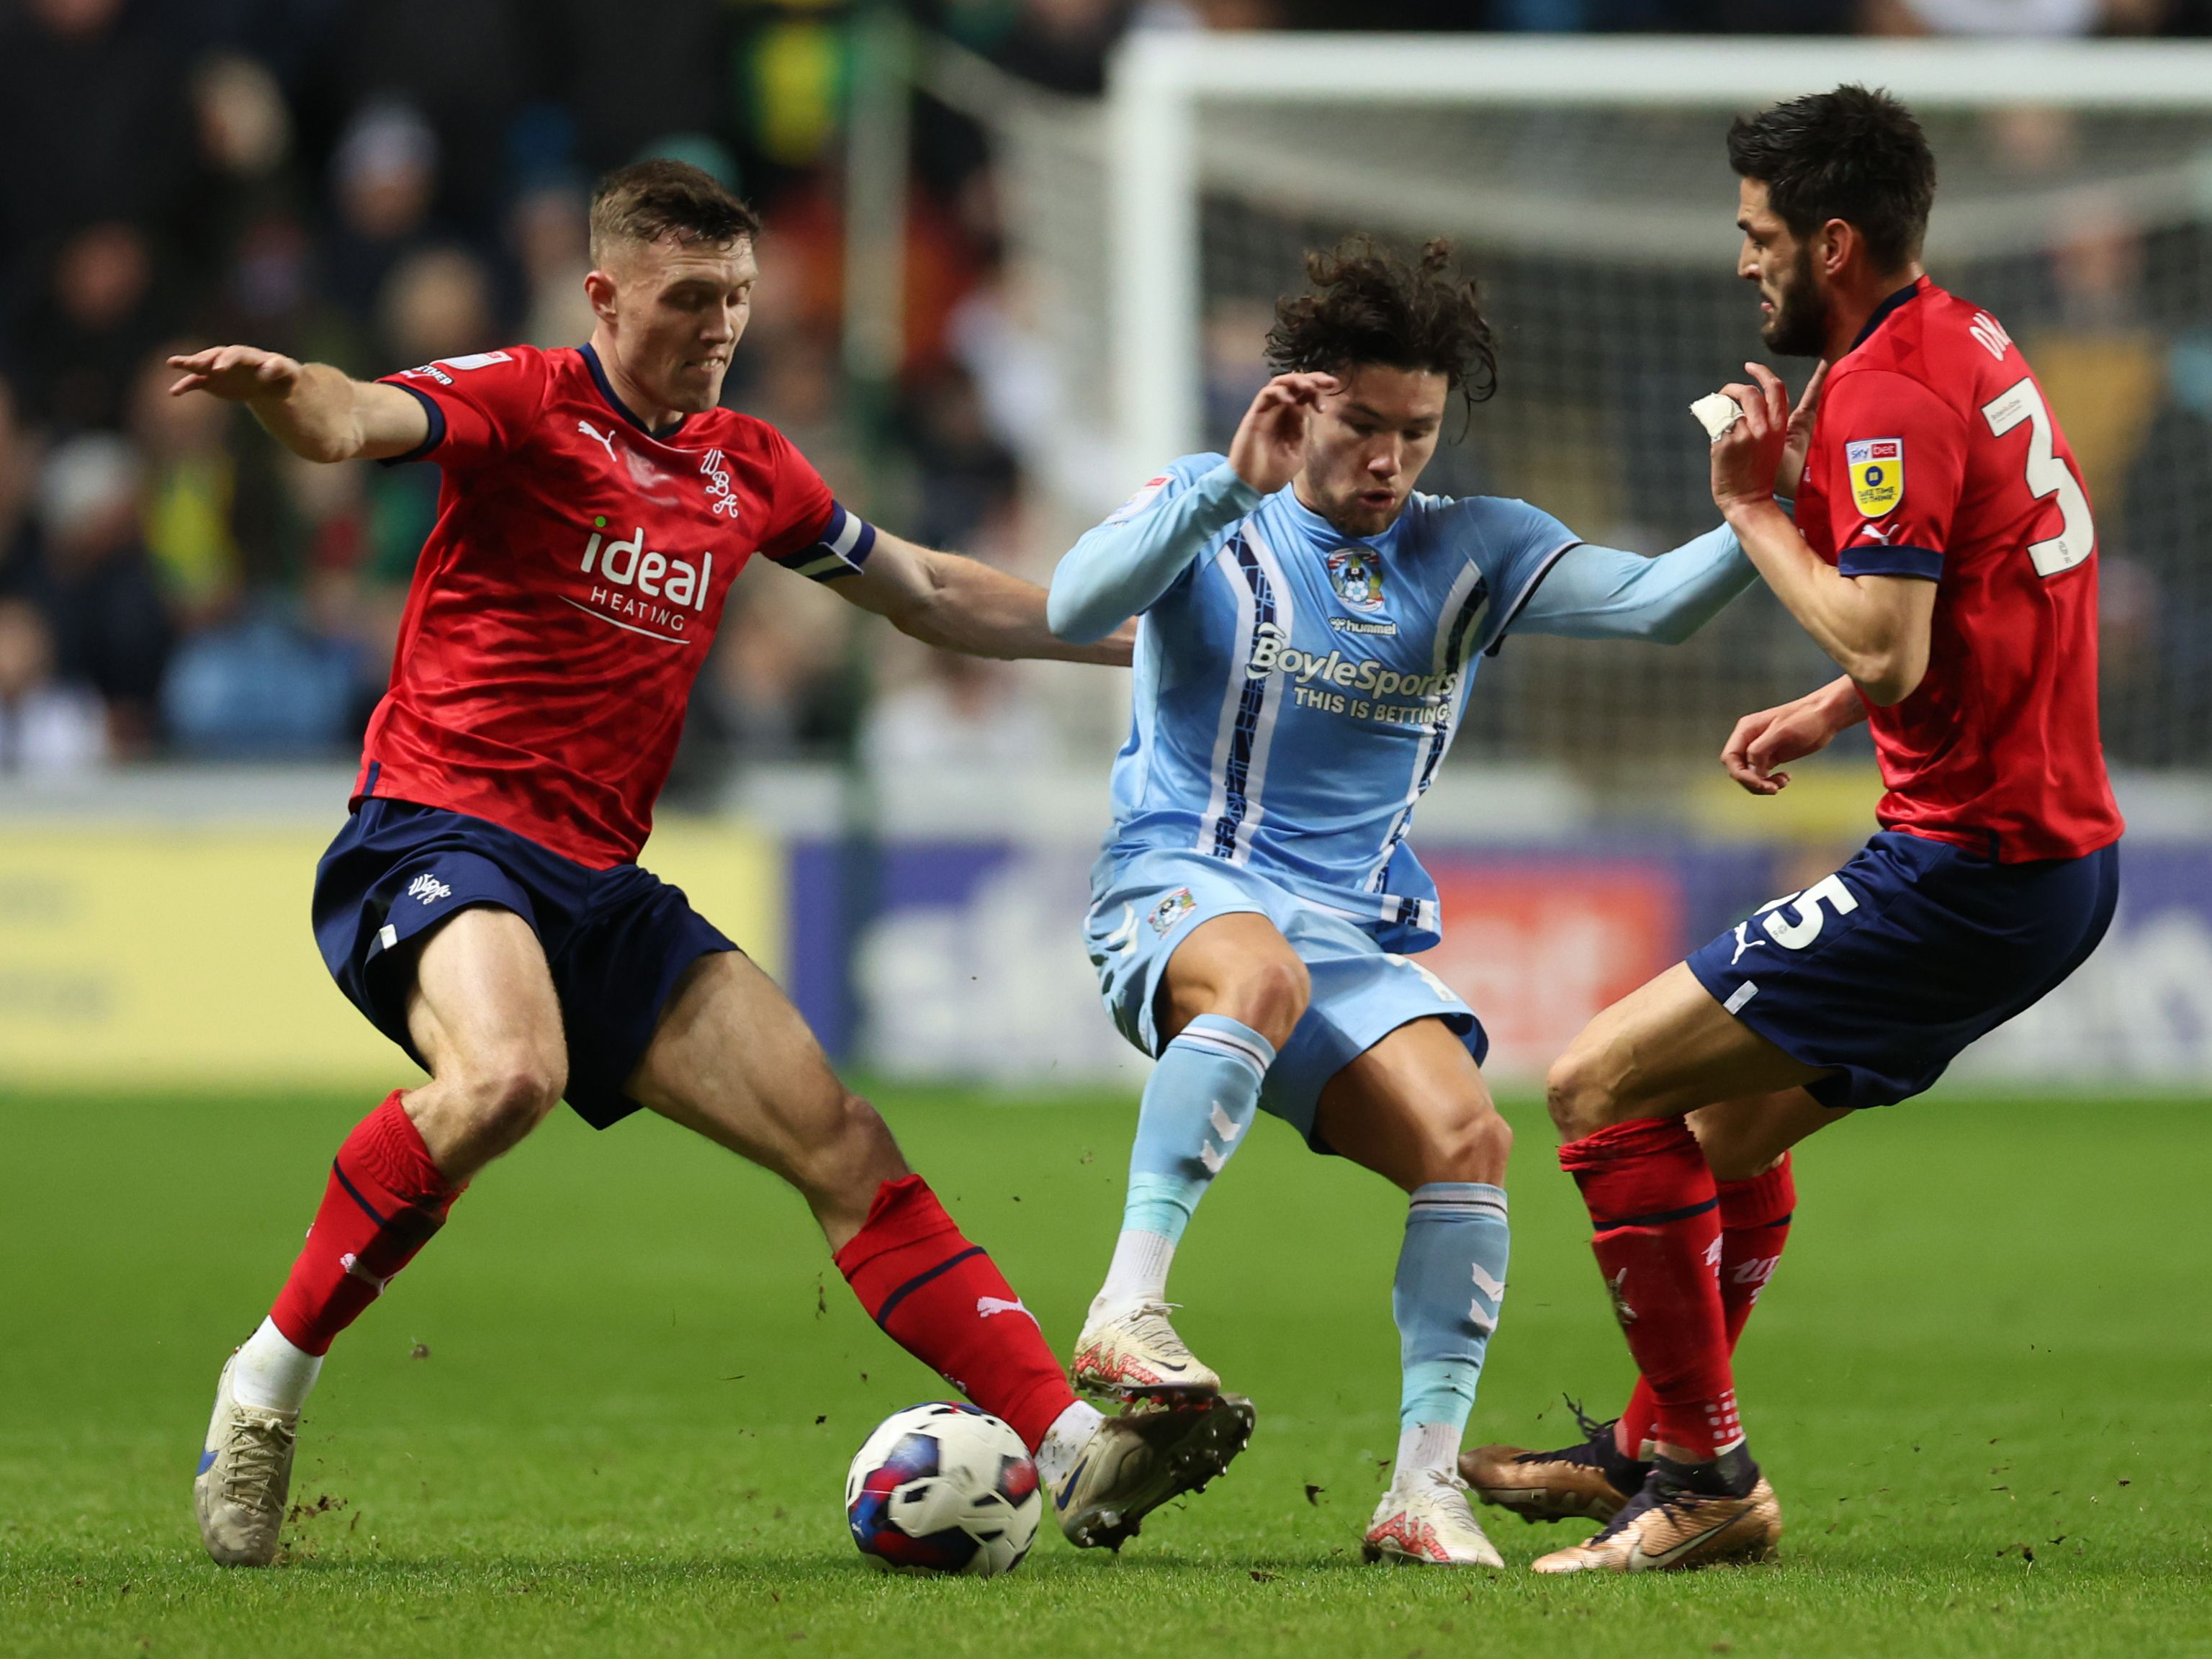 West Bromwich Albion vs Coventry: Coventry vs. West Bromwich